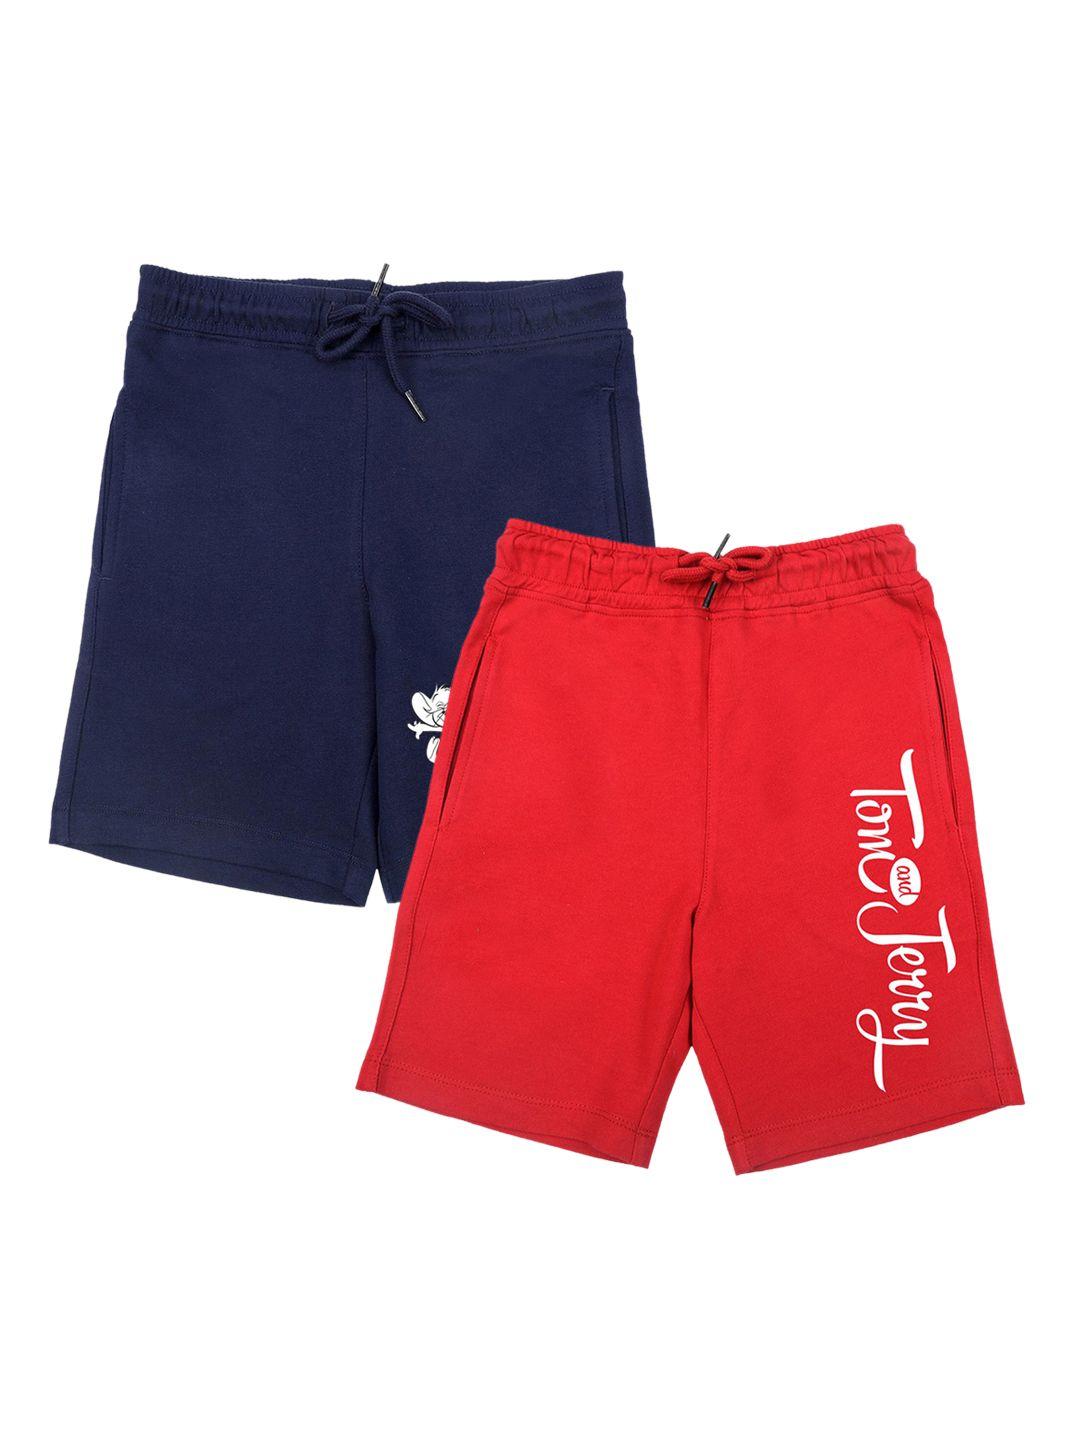 tom & jerry by wear your mind boys navy blue & red typography printed cotton shorts